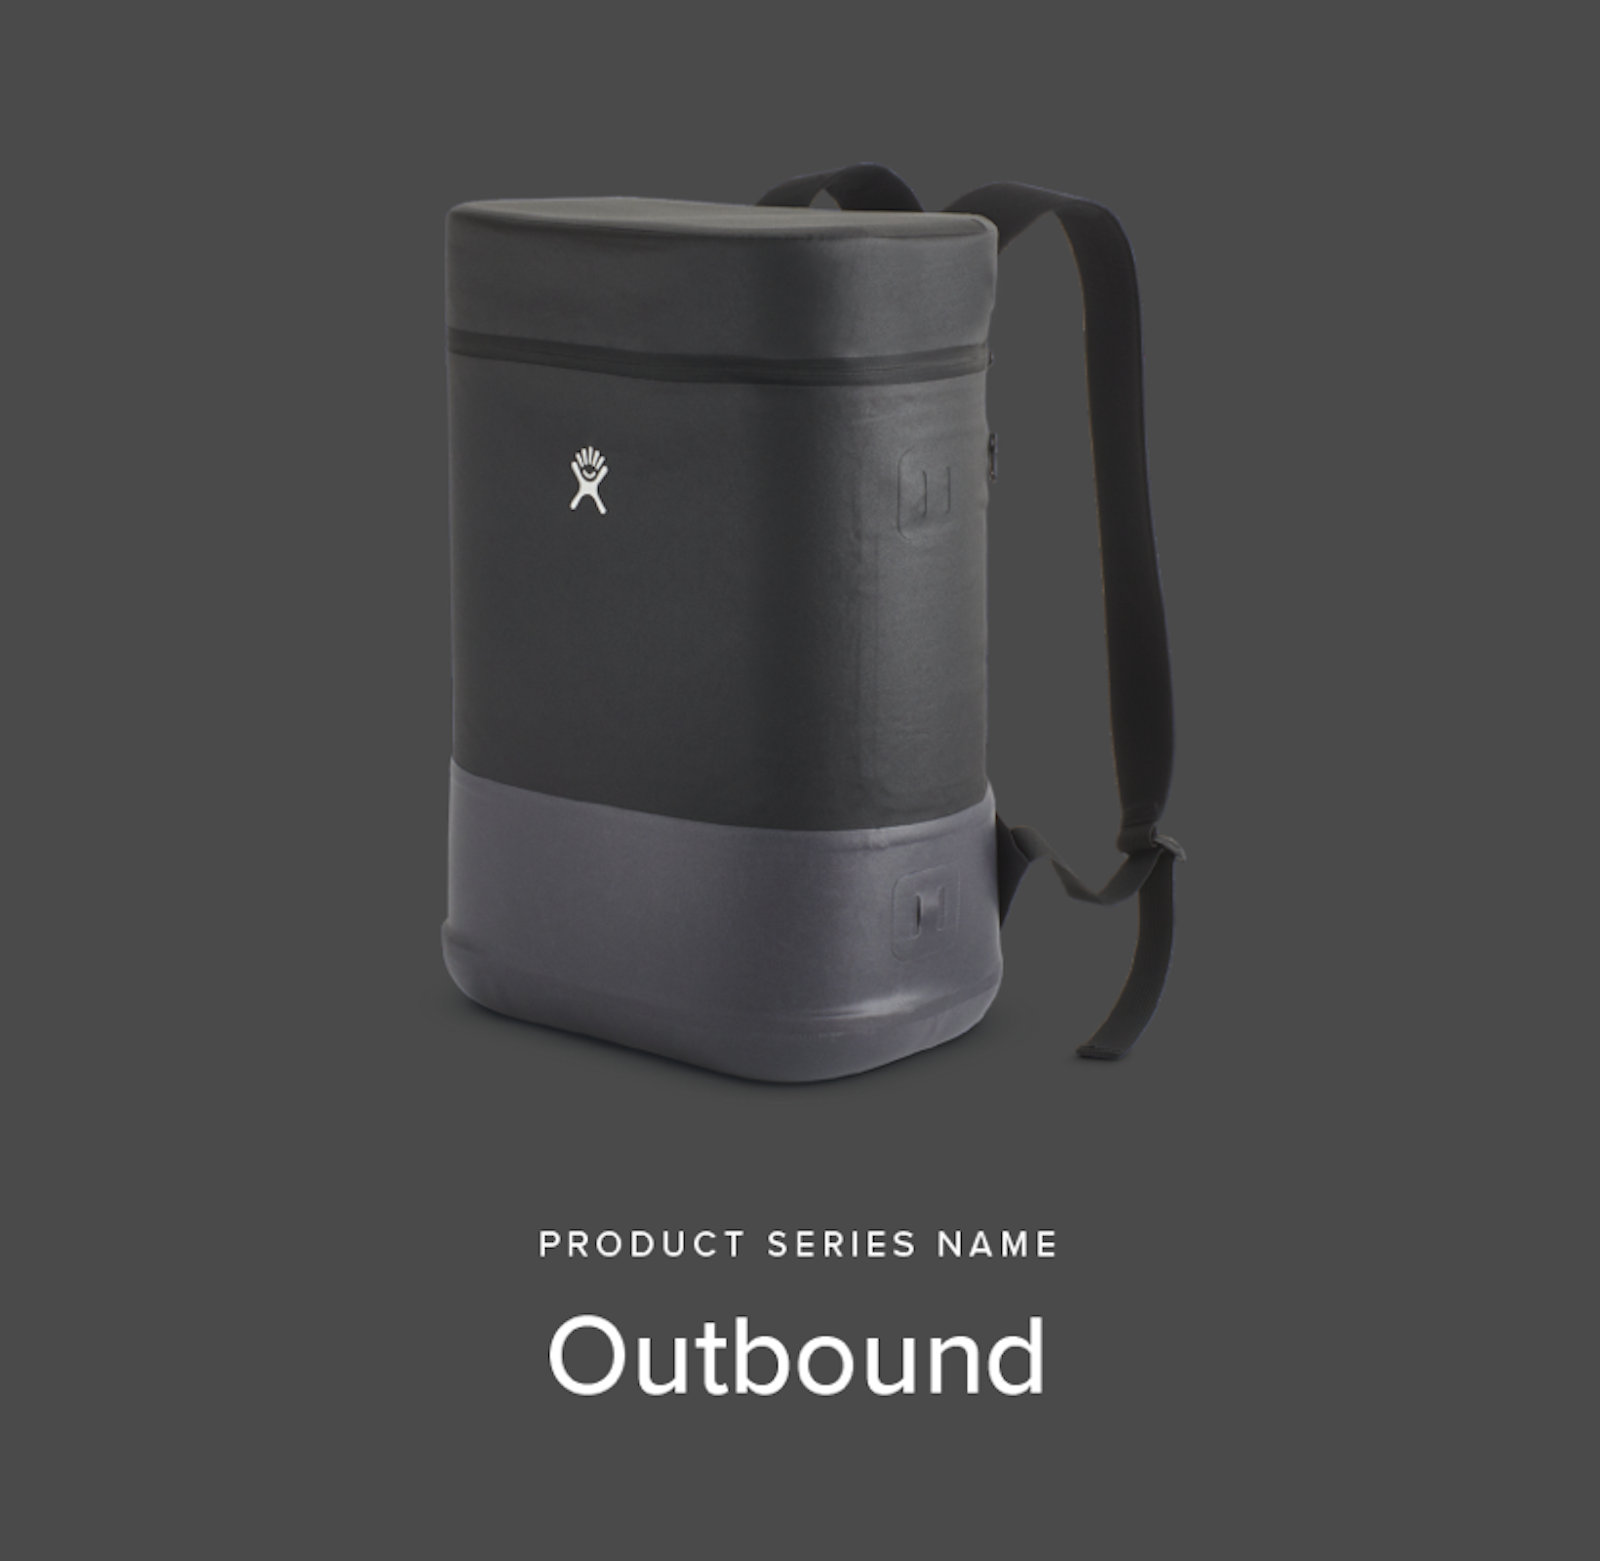 The Hydro Flask brand design for Outbound backpack product on black background.